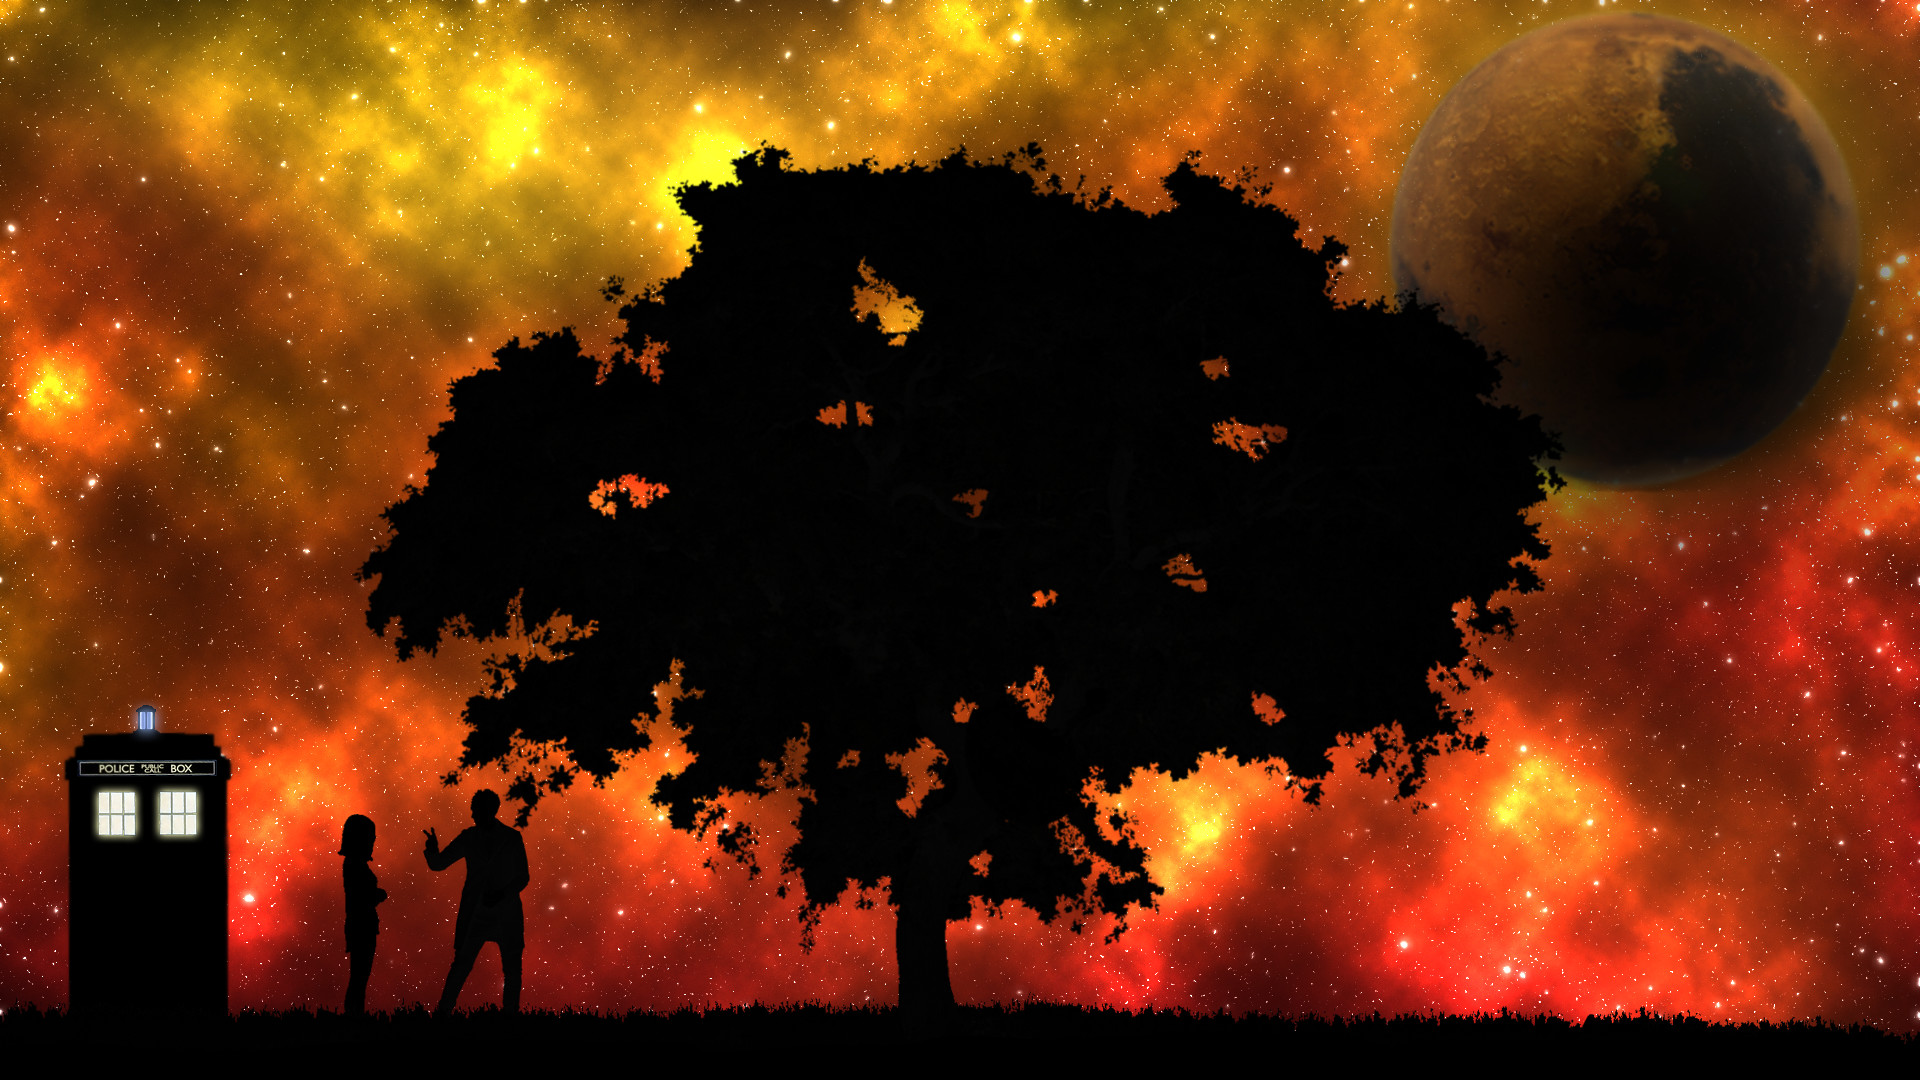 1920x1080 Arts/CraftsA Doctor Who wallpaper I threw together while bored ()  ...